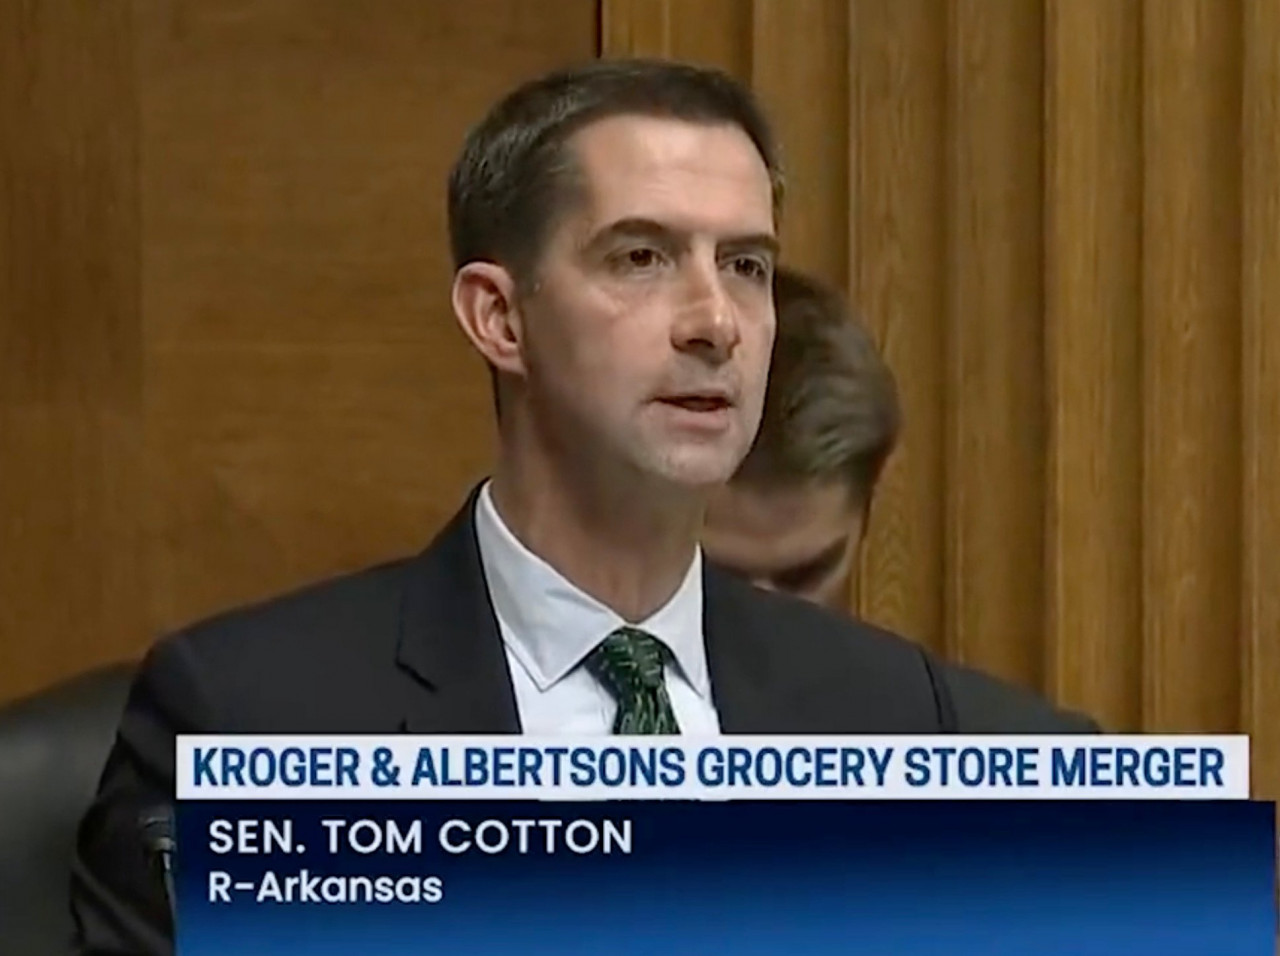 Senator Tom Cotton to Woke Kroger CEO: “I’m Sorry That’s Happening to You. Best of Luck”